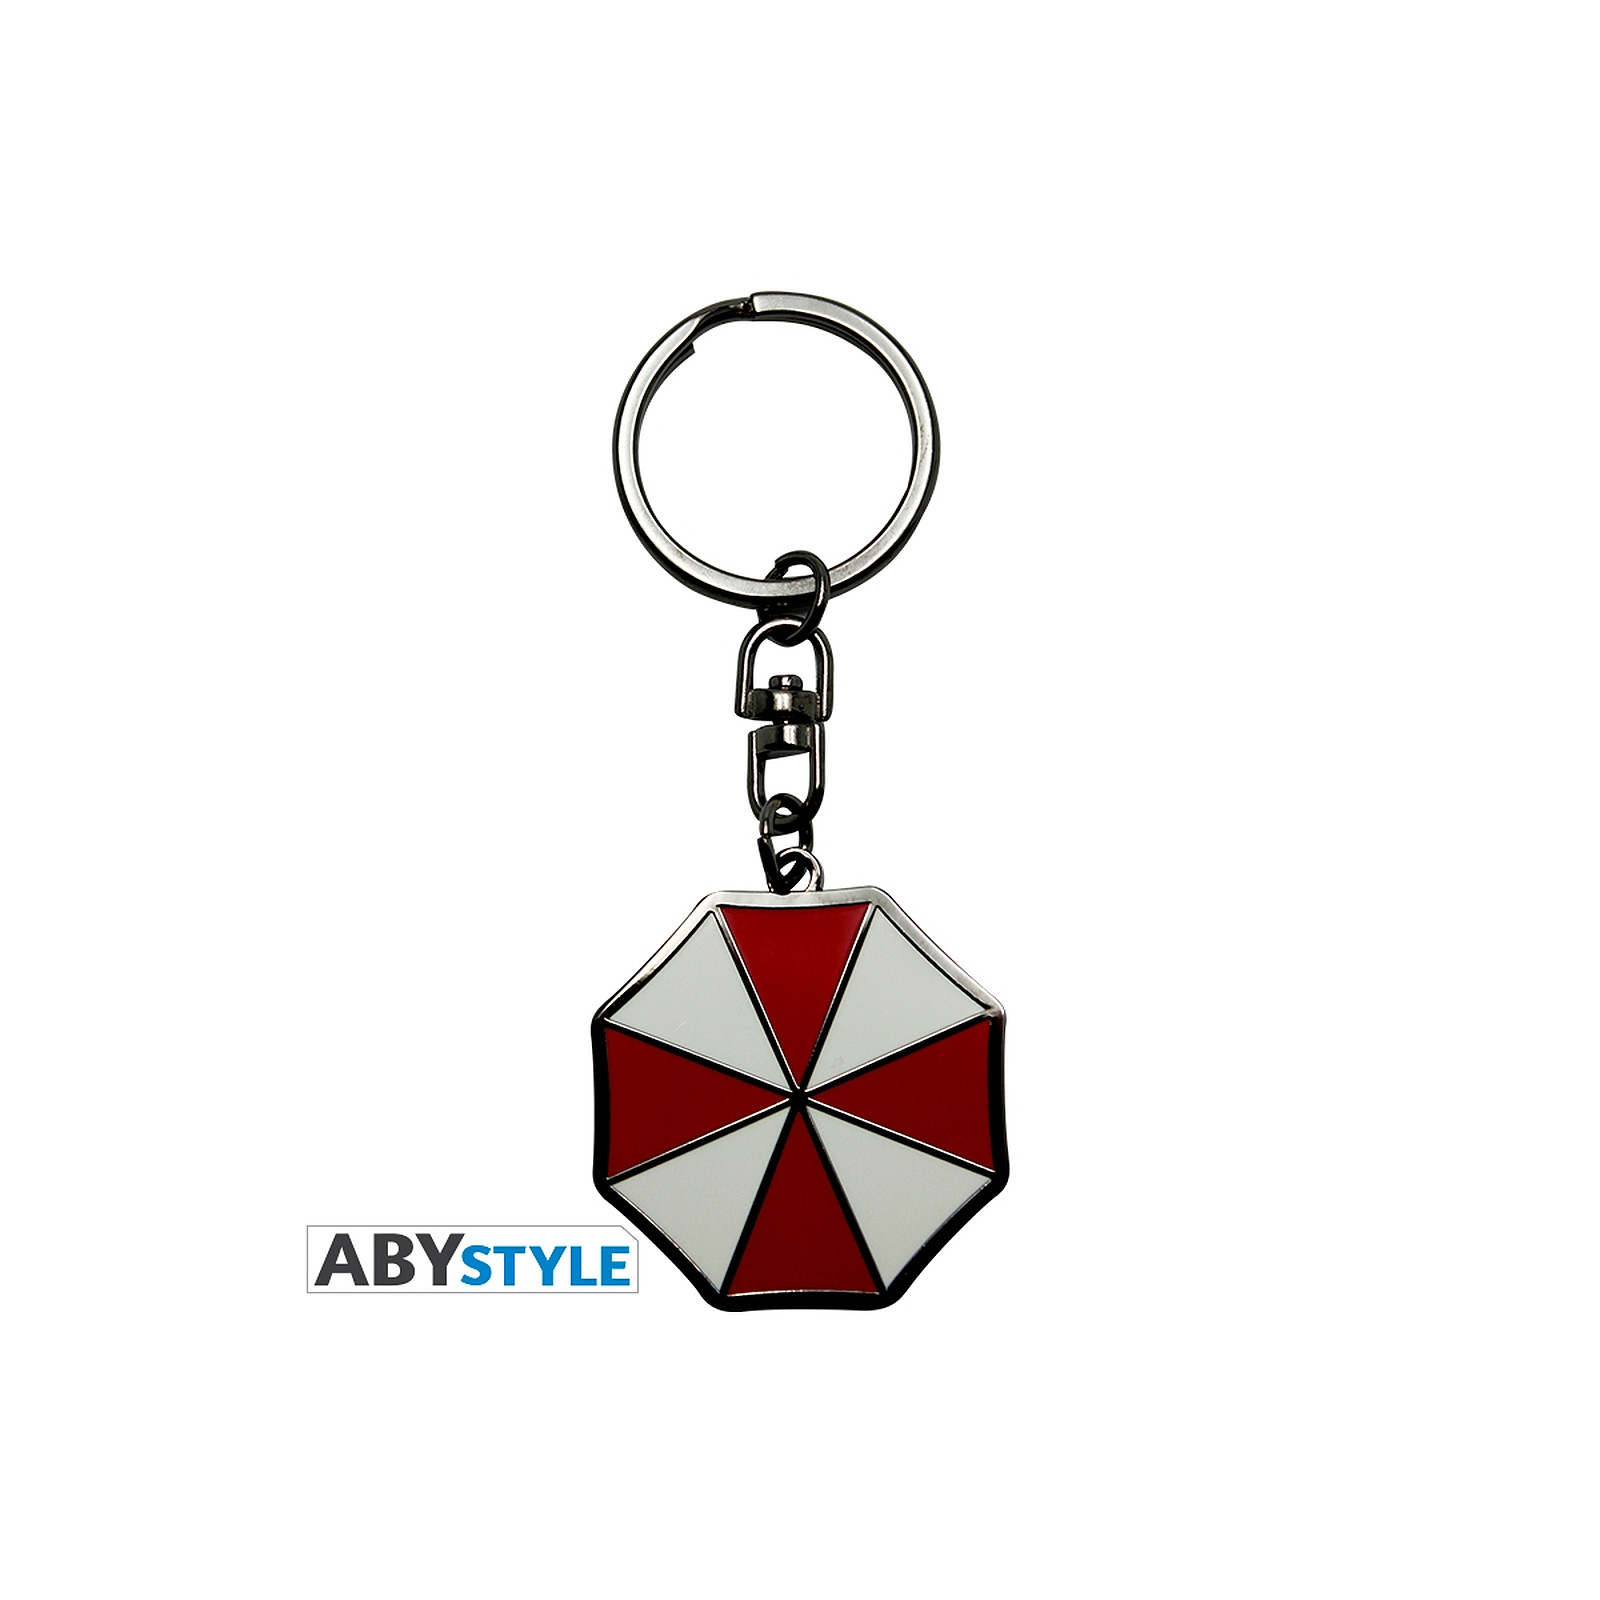 Resident Evil - Porte-cles Umbrella - Porte-cles Abystyle